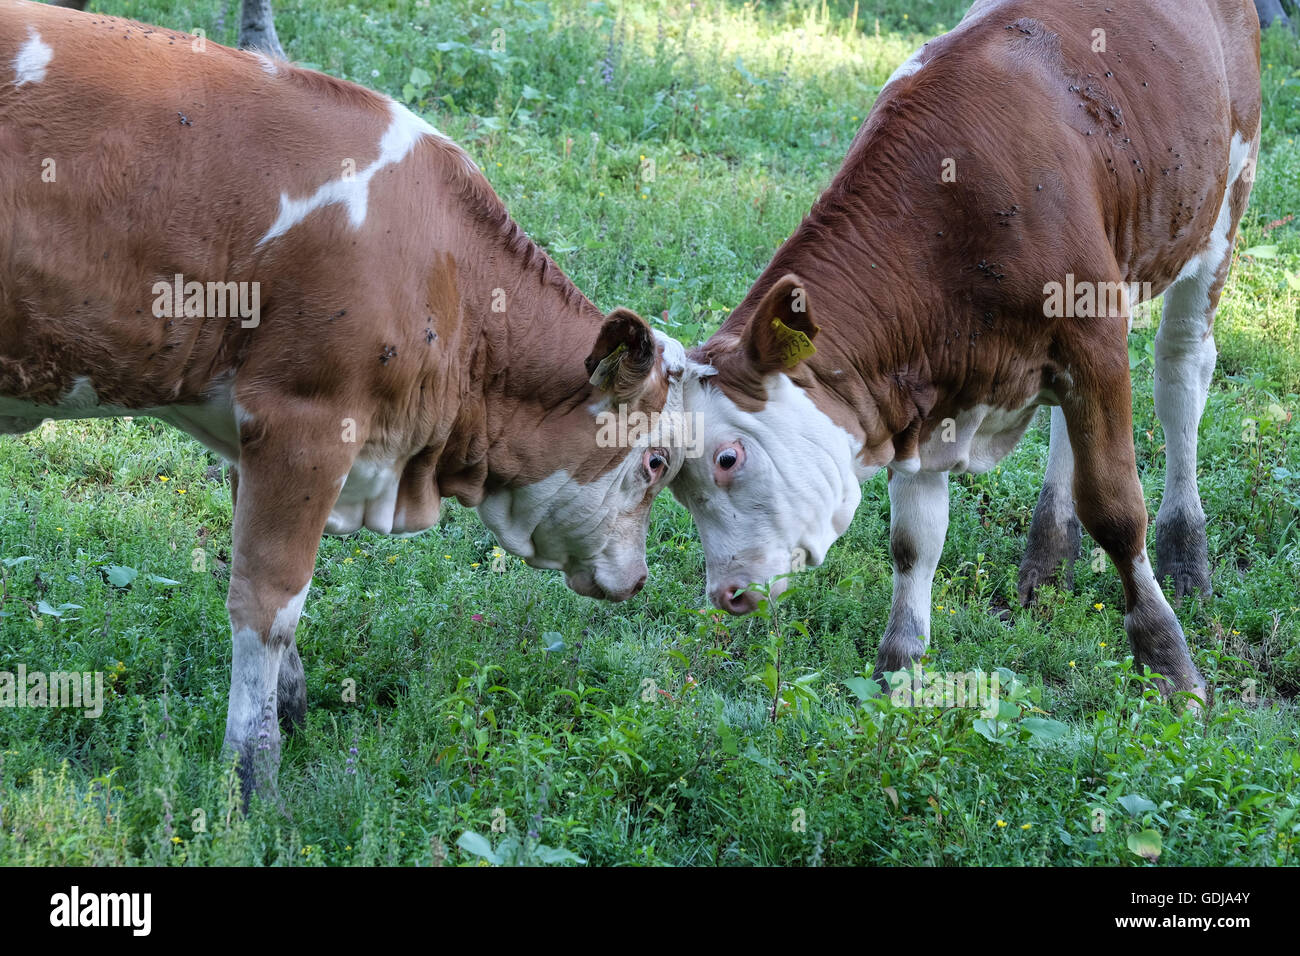 Two cows head to head Stock Photo